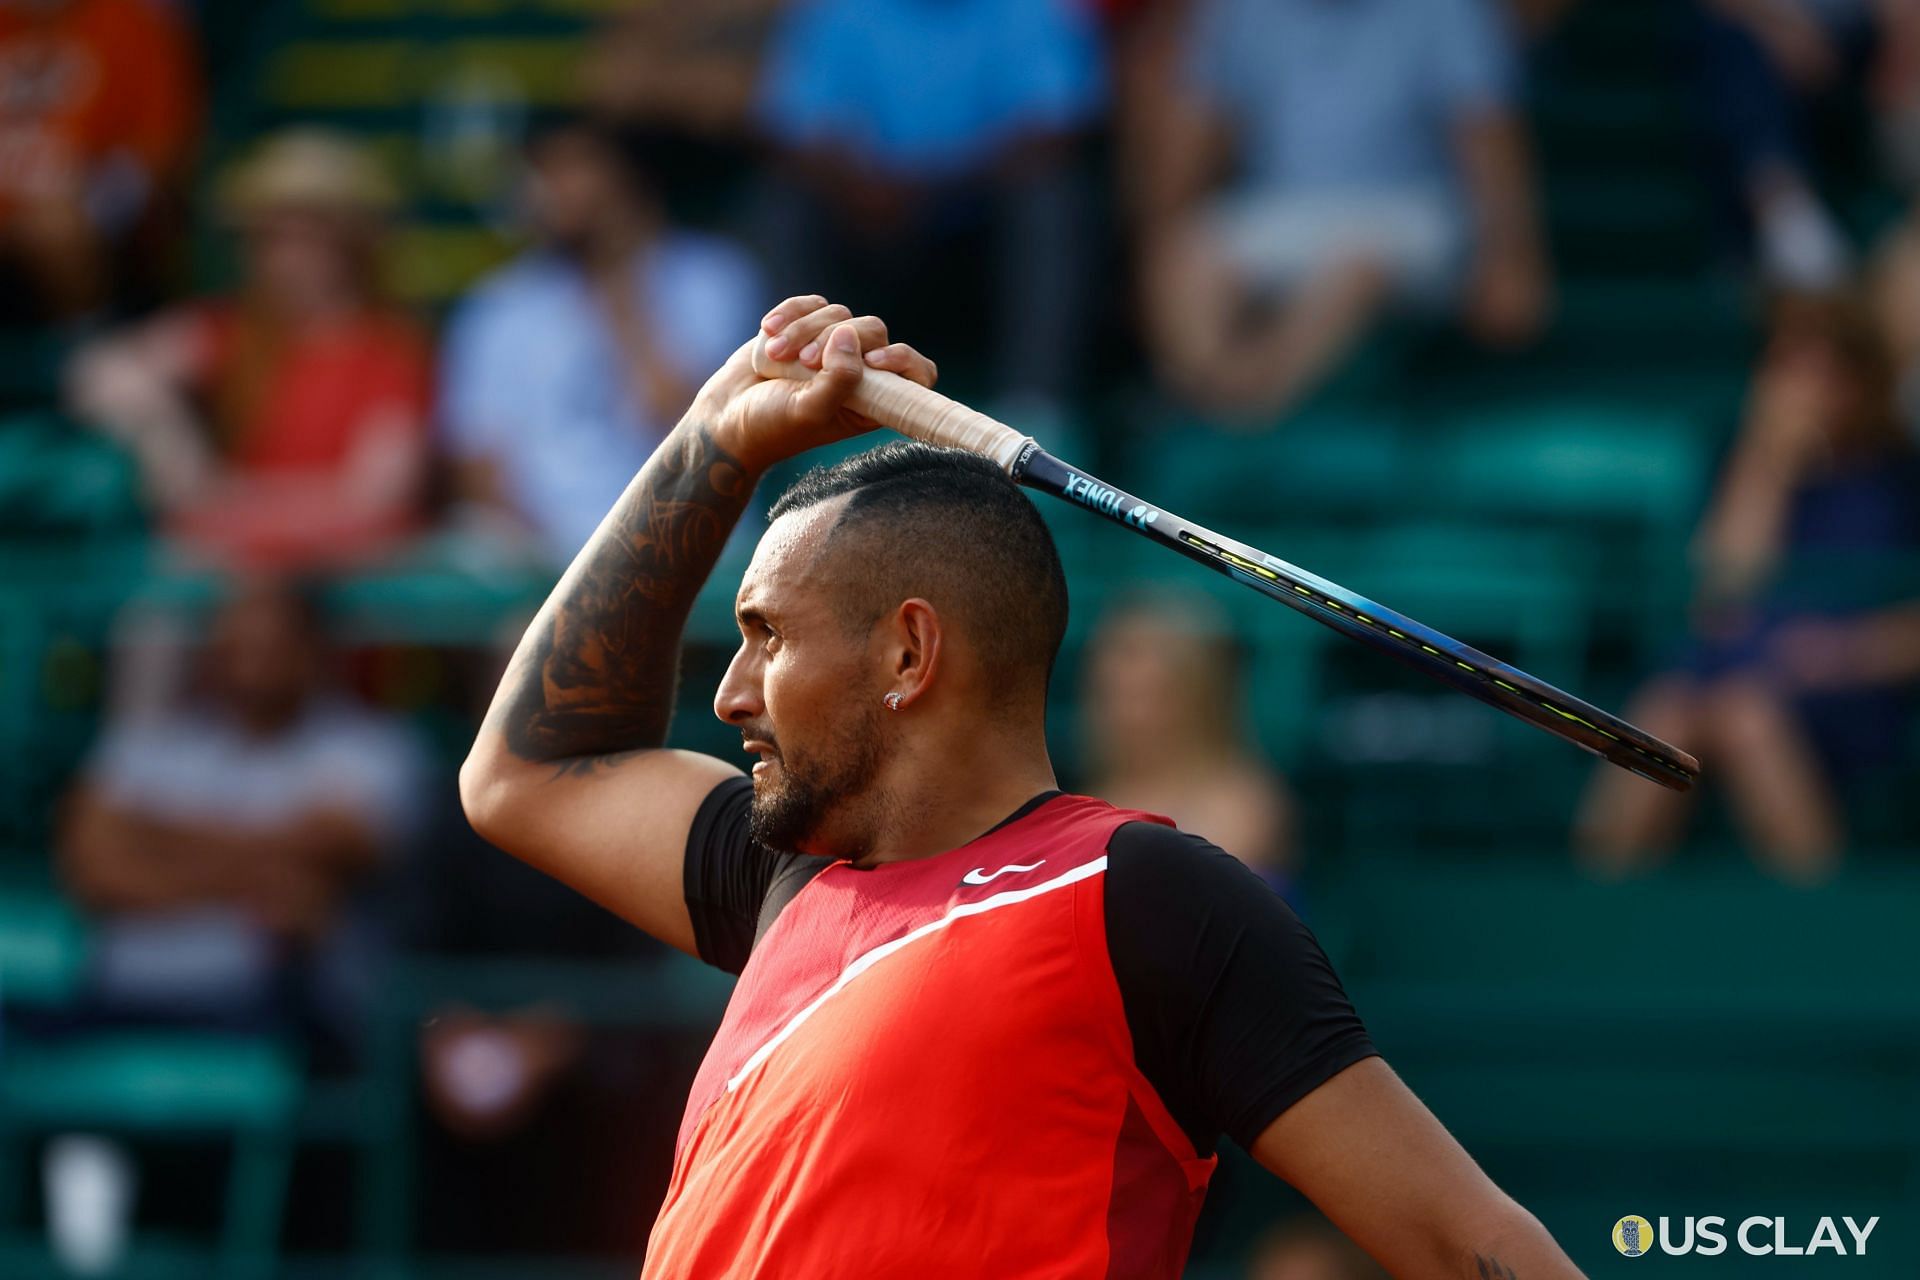 Nick Kyrgios advances to his first quarterfinal on clay in four years after defeating Tommy Paul in Houston (Source: Twitter Houston ATP 250 @mensclaycourt)